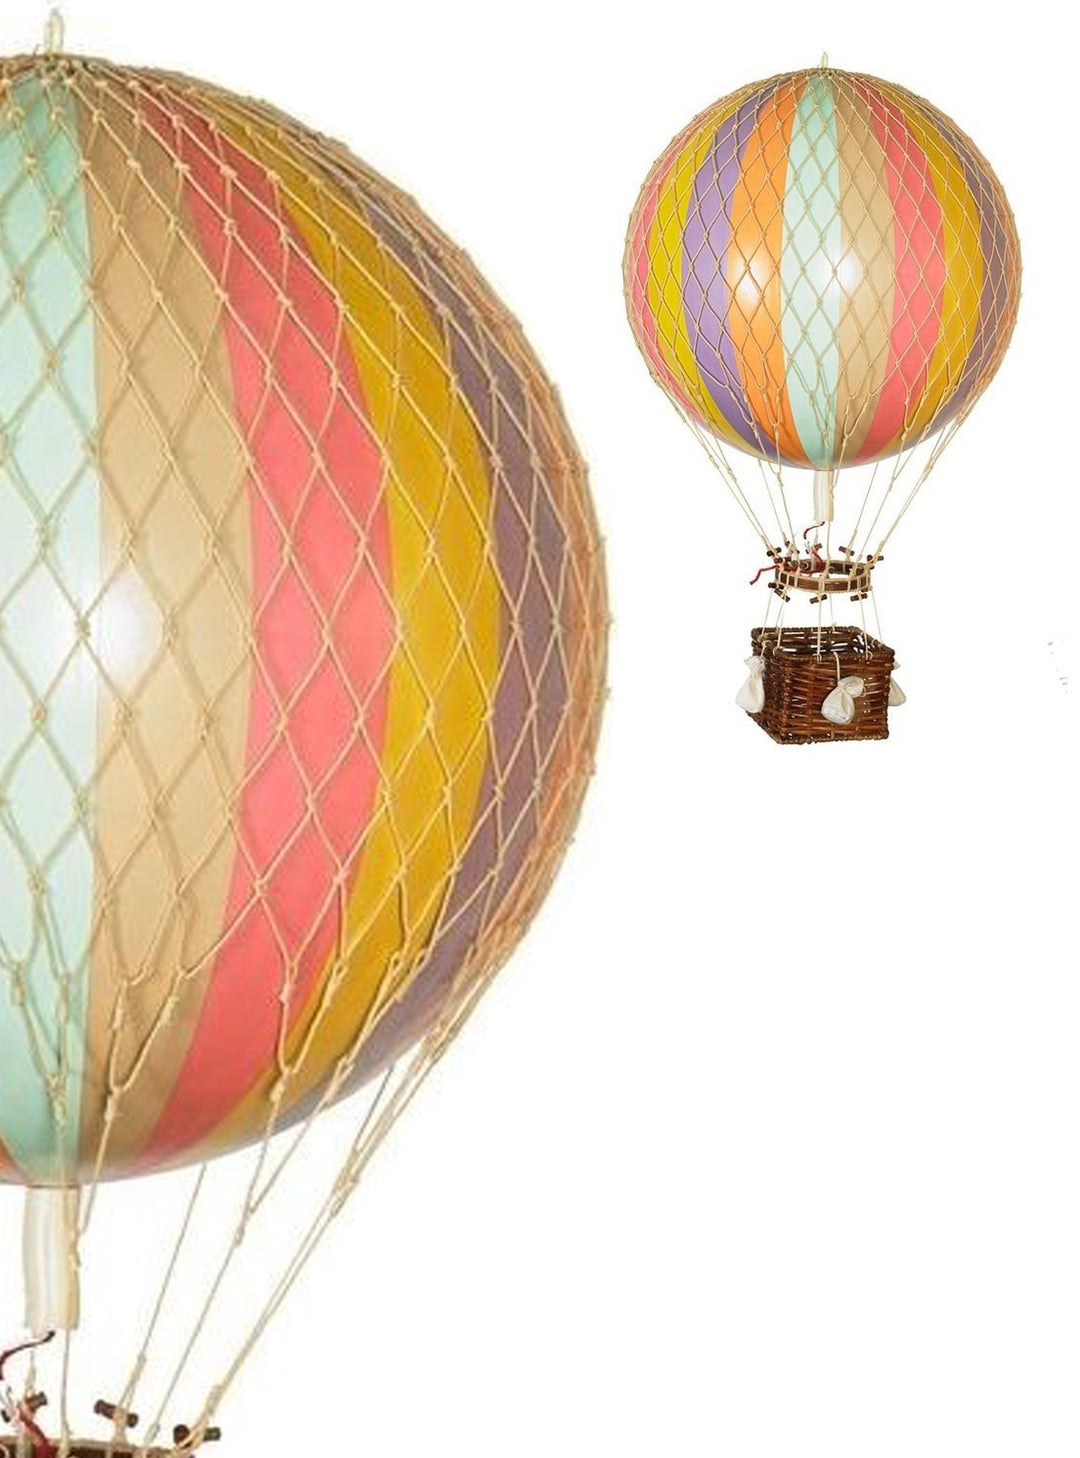 Authentic model  Jules Verne's inspired vintage replica hot air balloon, pastel rainbow red balloon, hot air balloon replica model, 